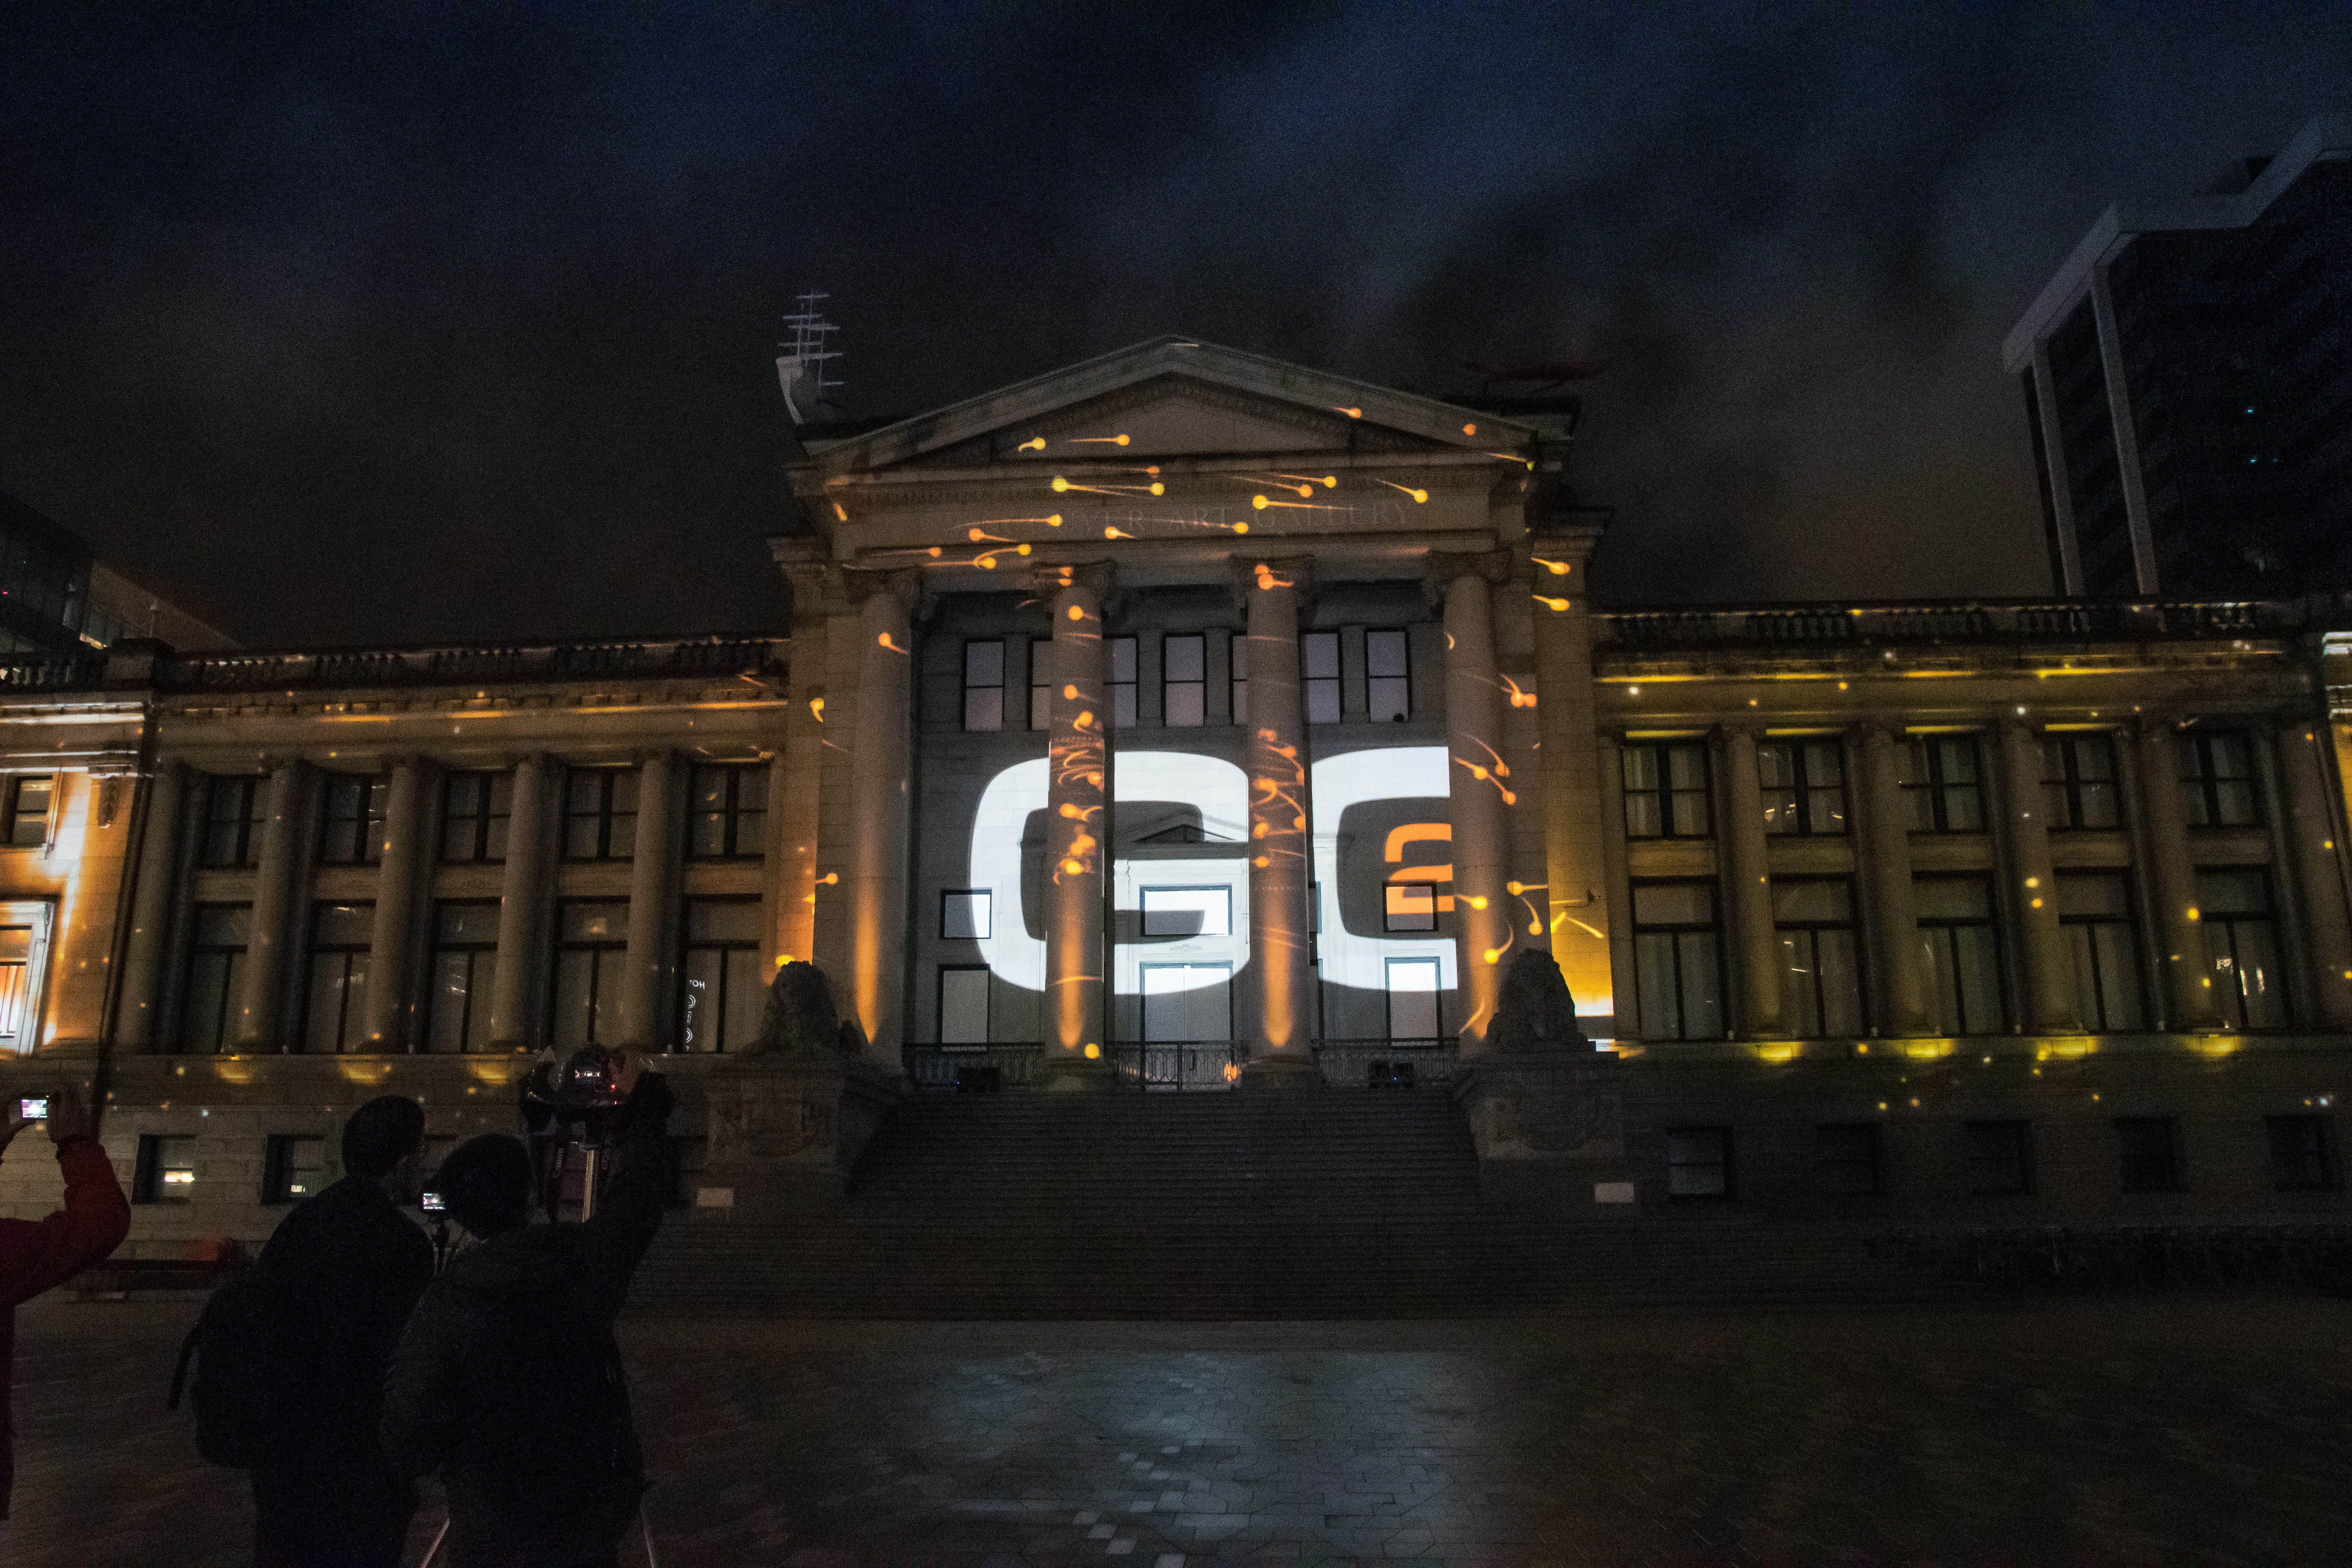 go2productions_facadefest_projectionmapping13-1600x740 Facade Festival 2019